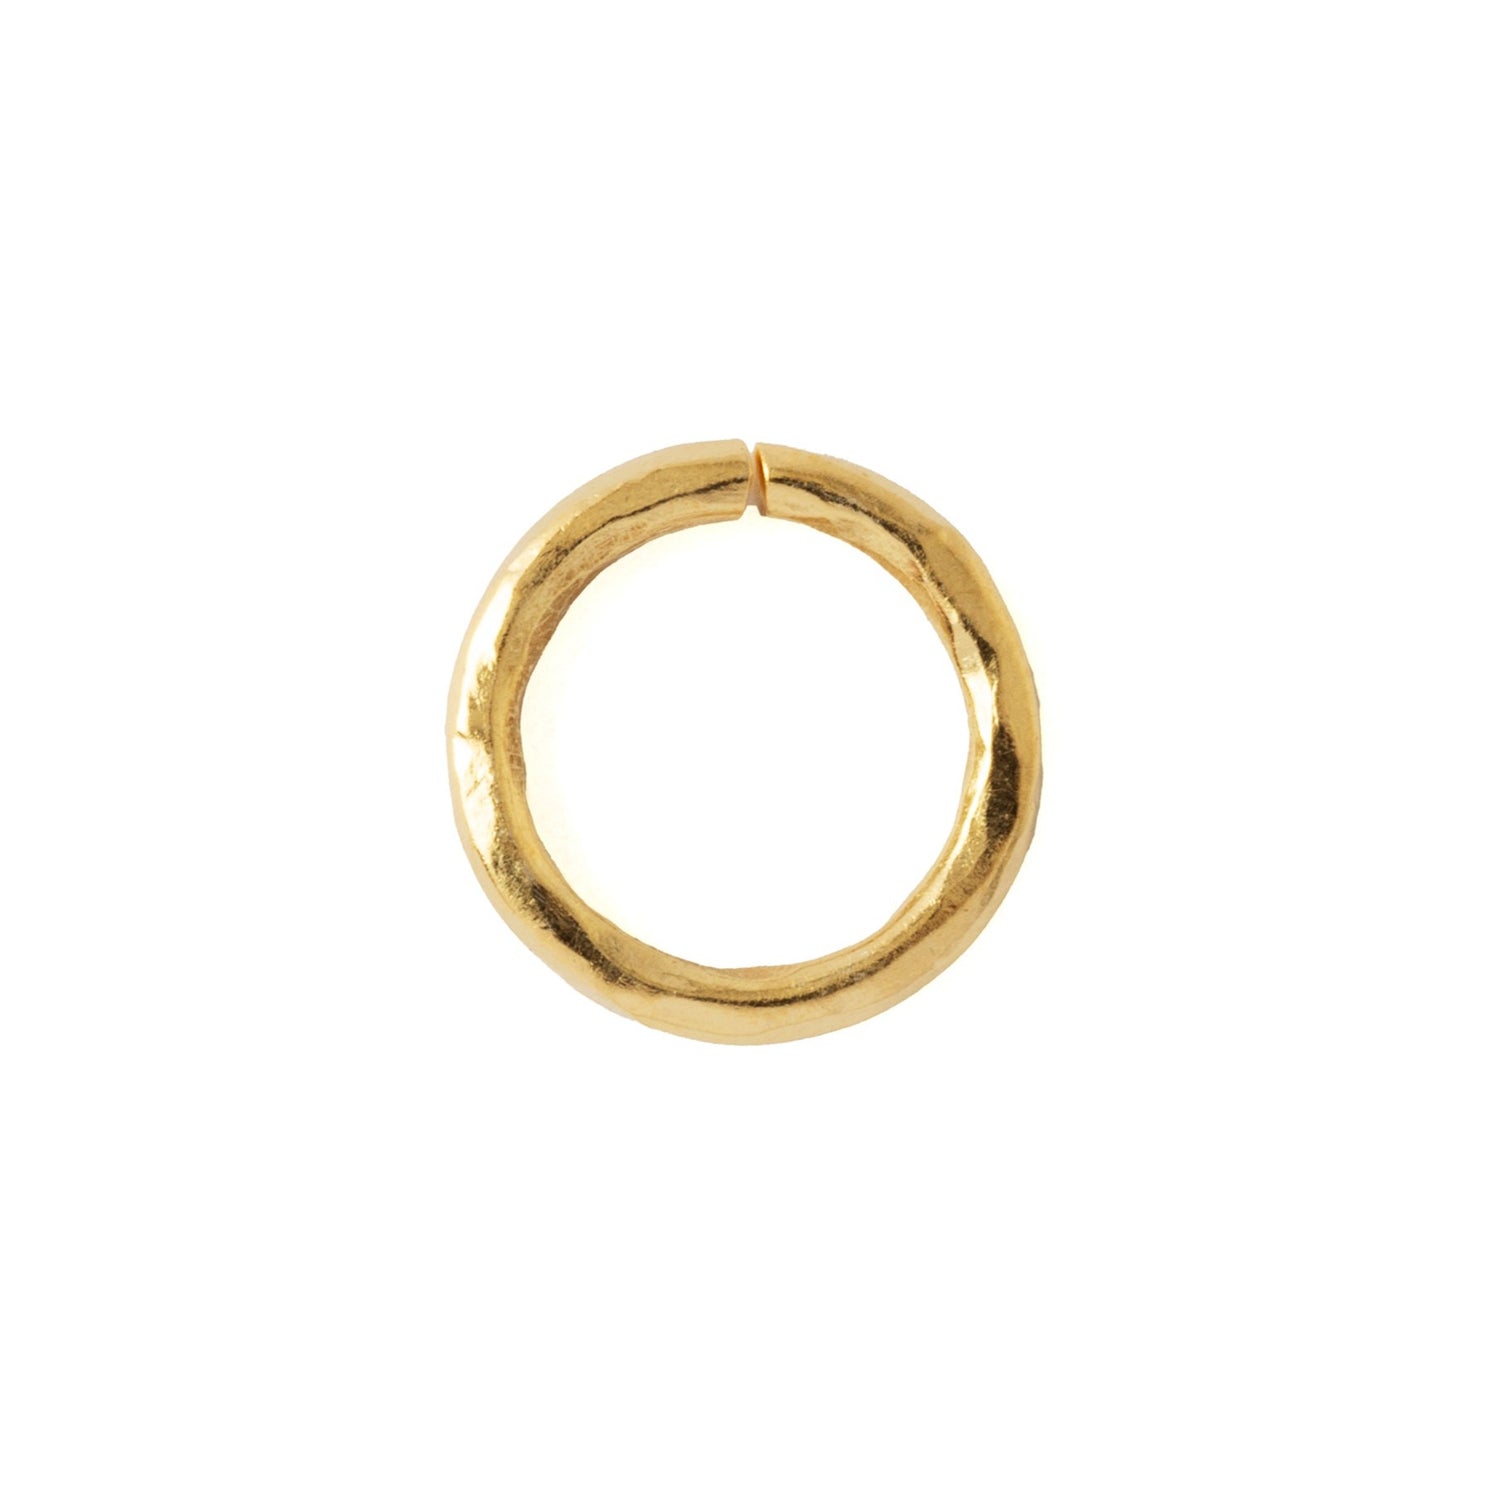 Hammered Gold Piercing Ring frontal view